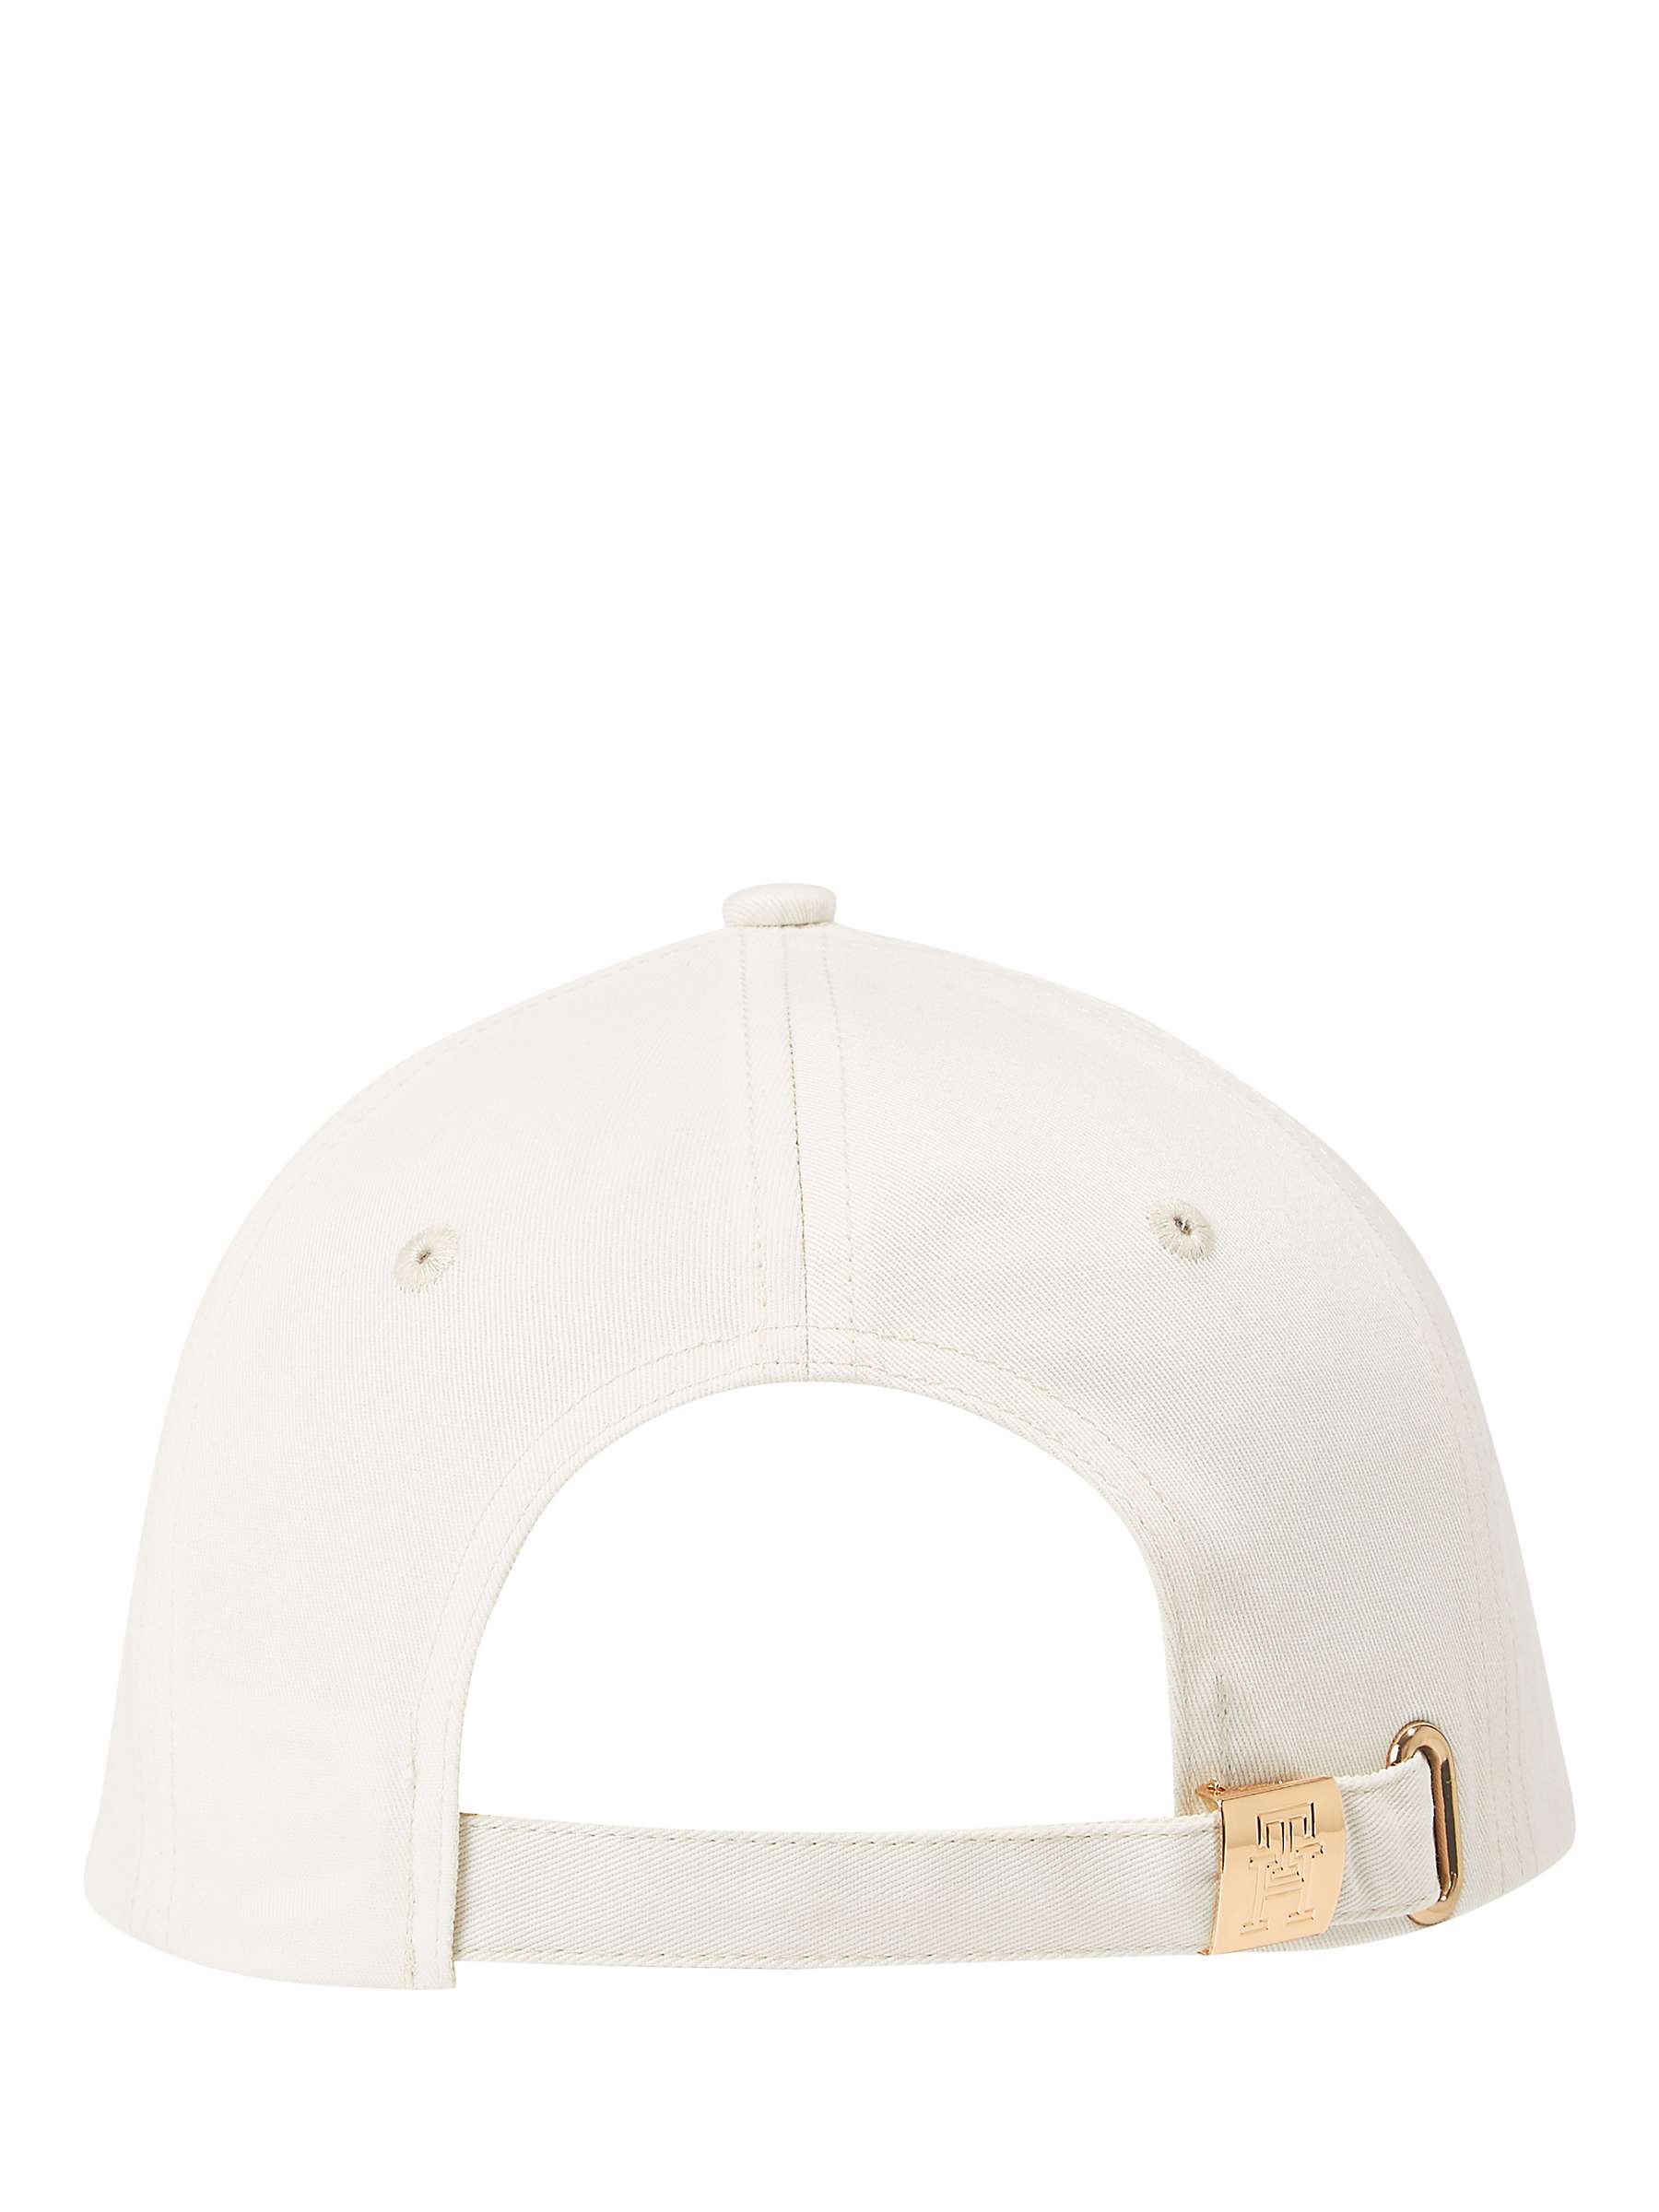 Buy Tommy Hilfiger Essential Chic Cap, Calico Online at johnlewis.com